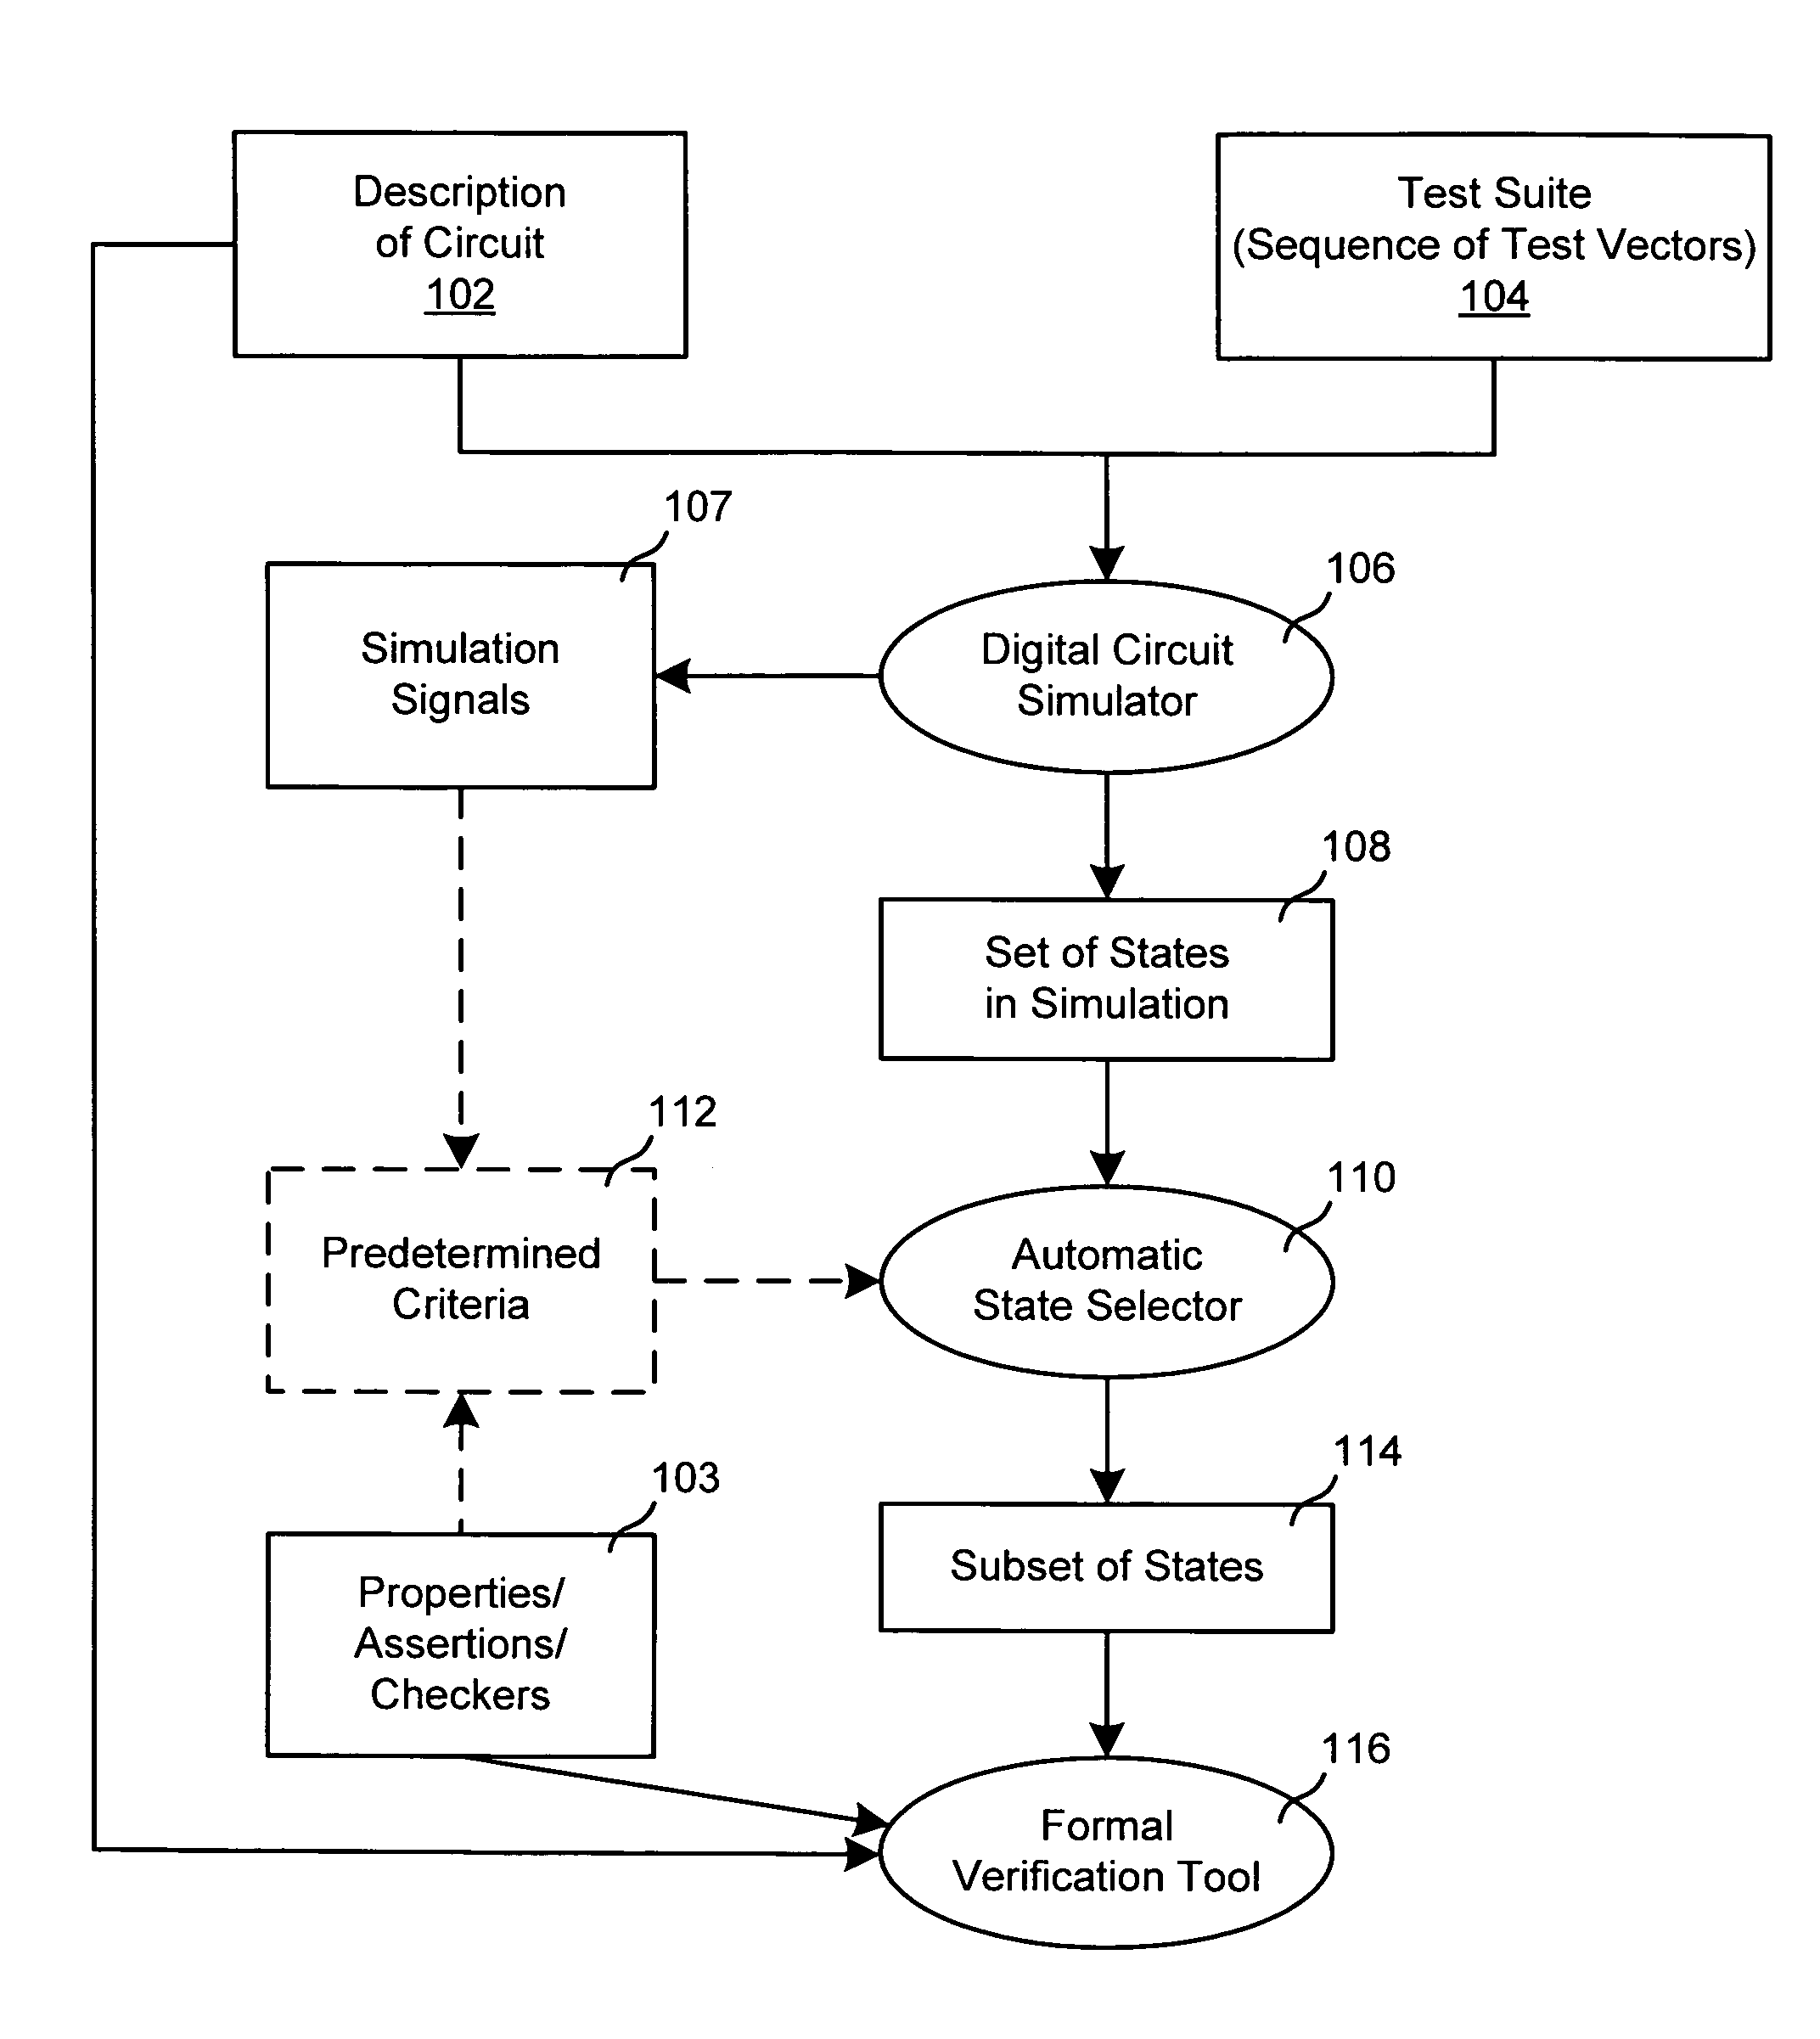 Selection of initial states for formal verification